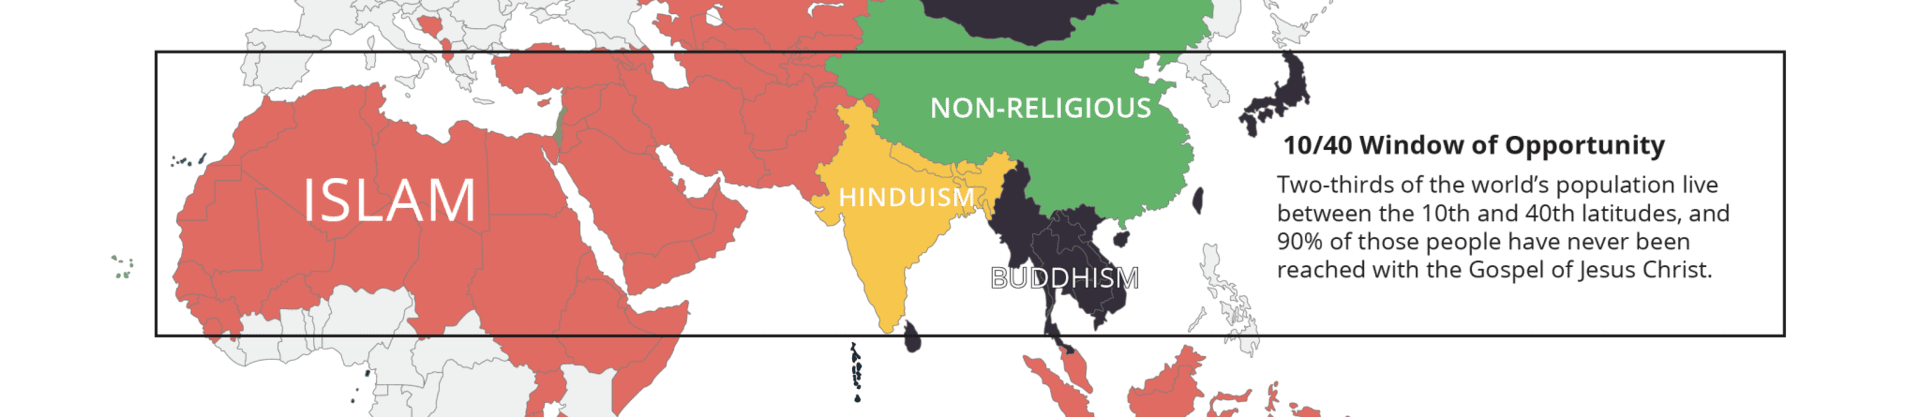 middle East religion map